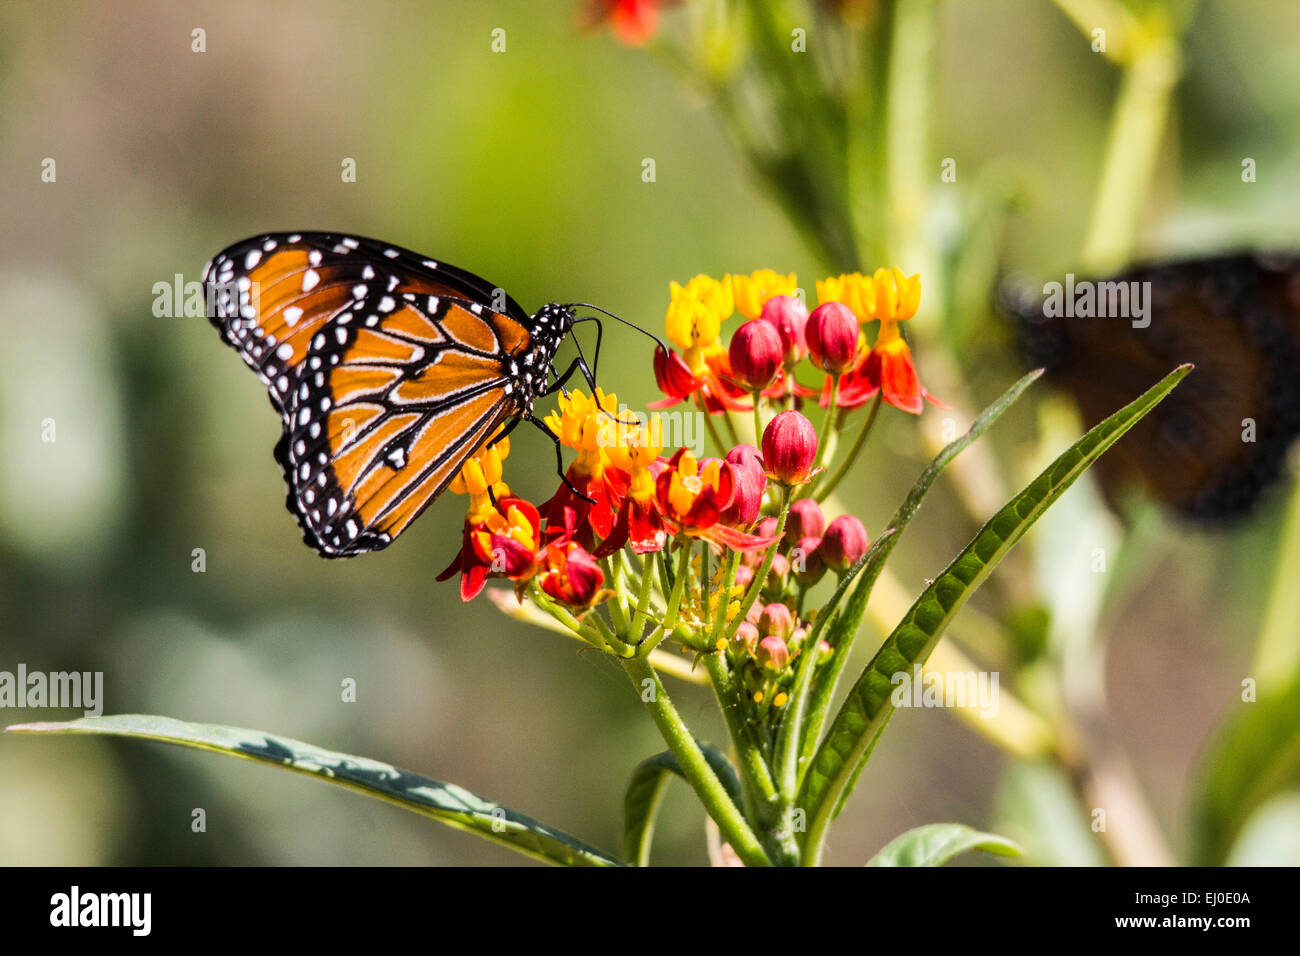 Asclepias curassavica, Blood-flower, Danaus gilippus, Schmetterling, Mexican Butterfly Weed, milkweed, Nymphalidae, Queen Butterf Stock Photo